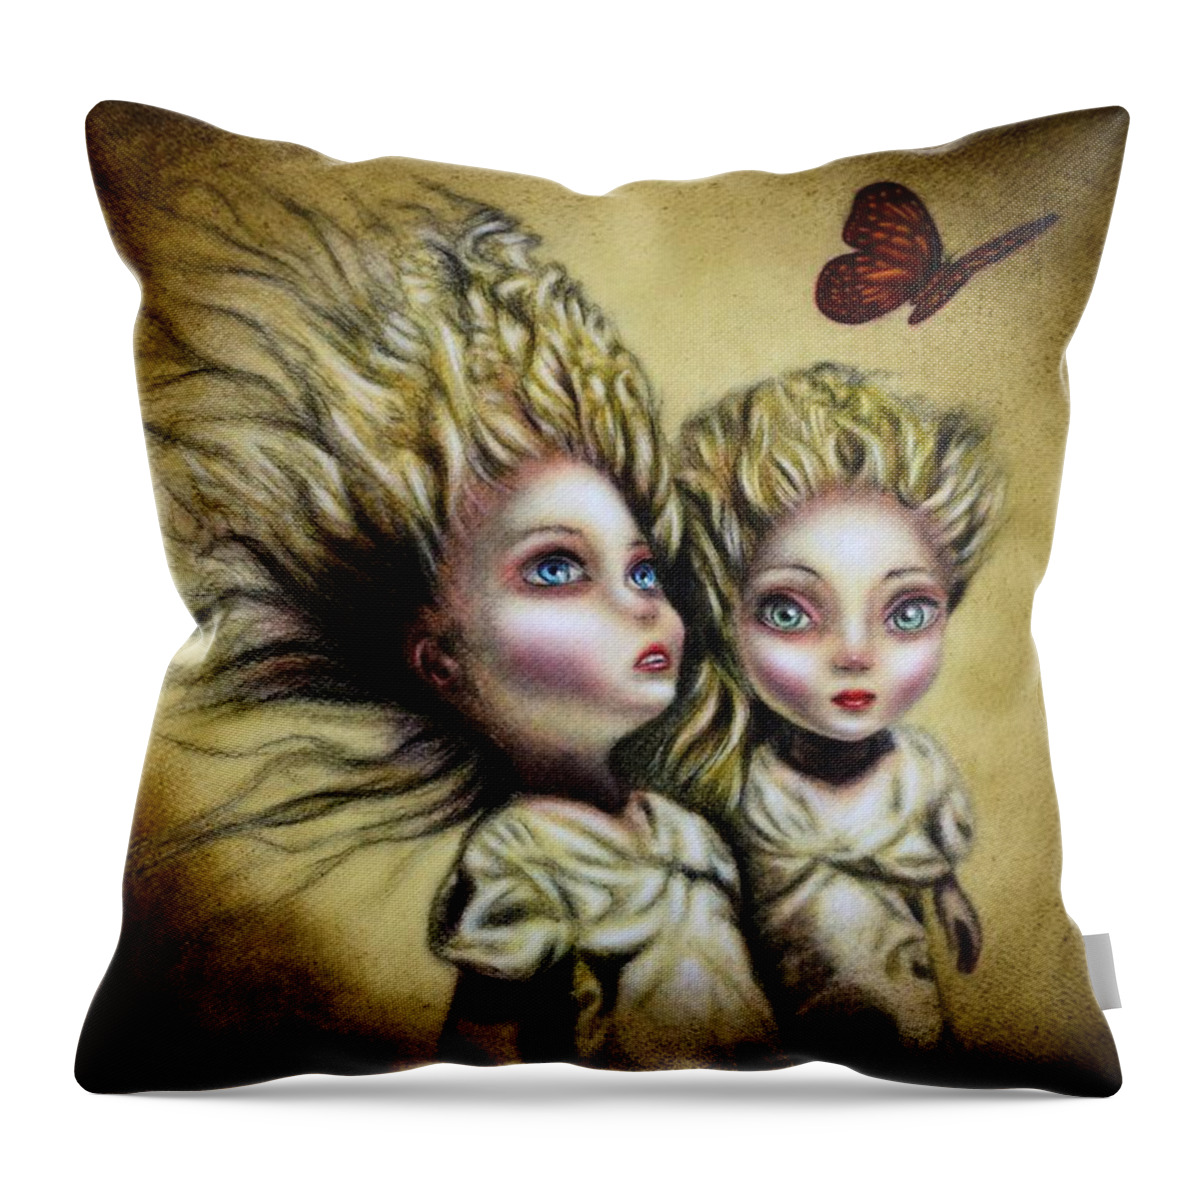 Yellow Throw Pillow featuring the painting The Offspring and the Butterfly by Tiago Azevedo